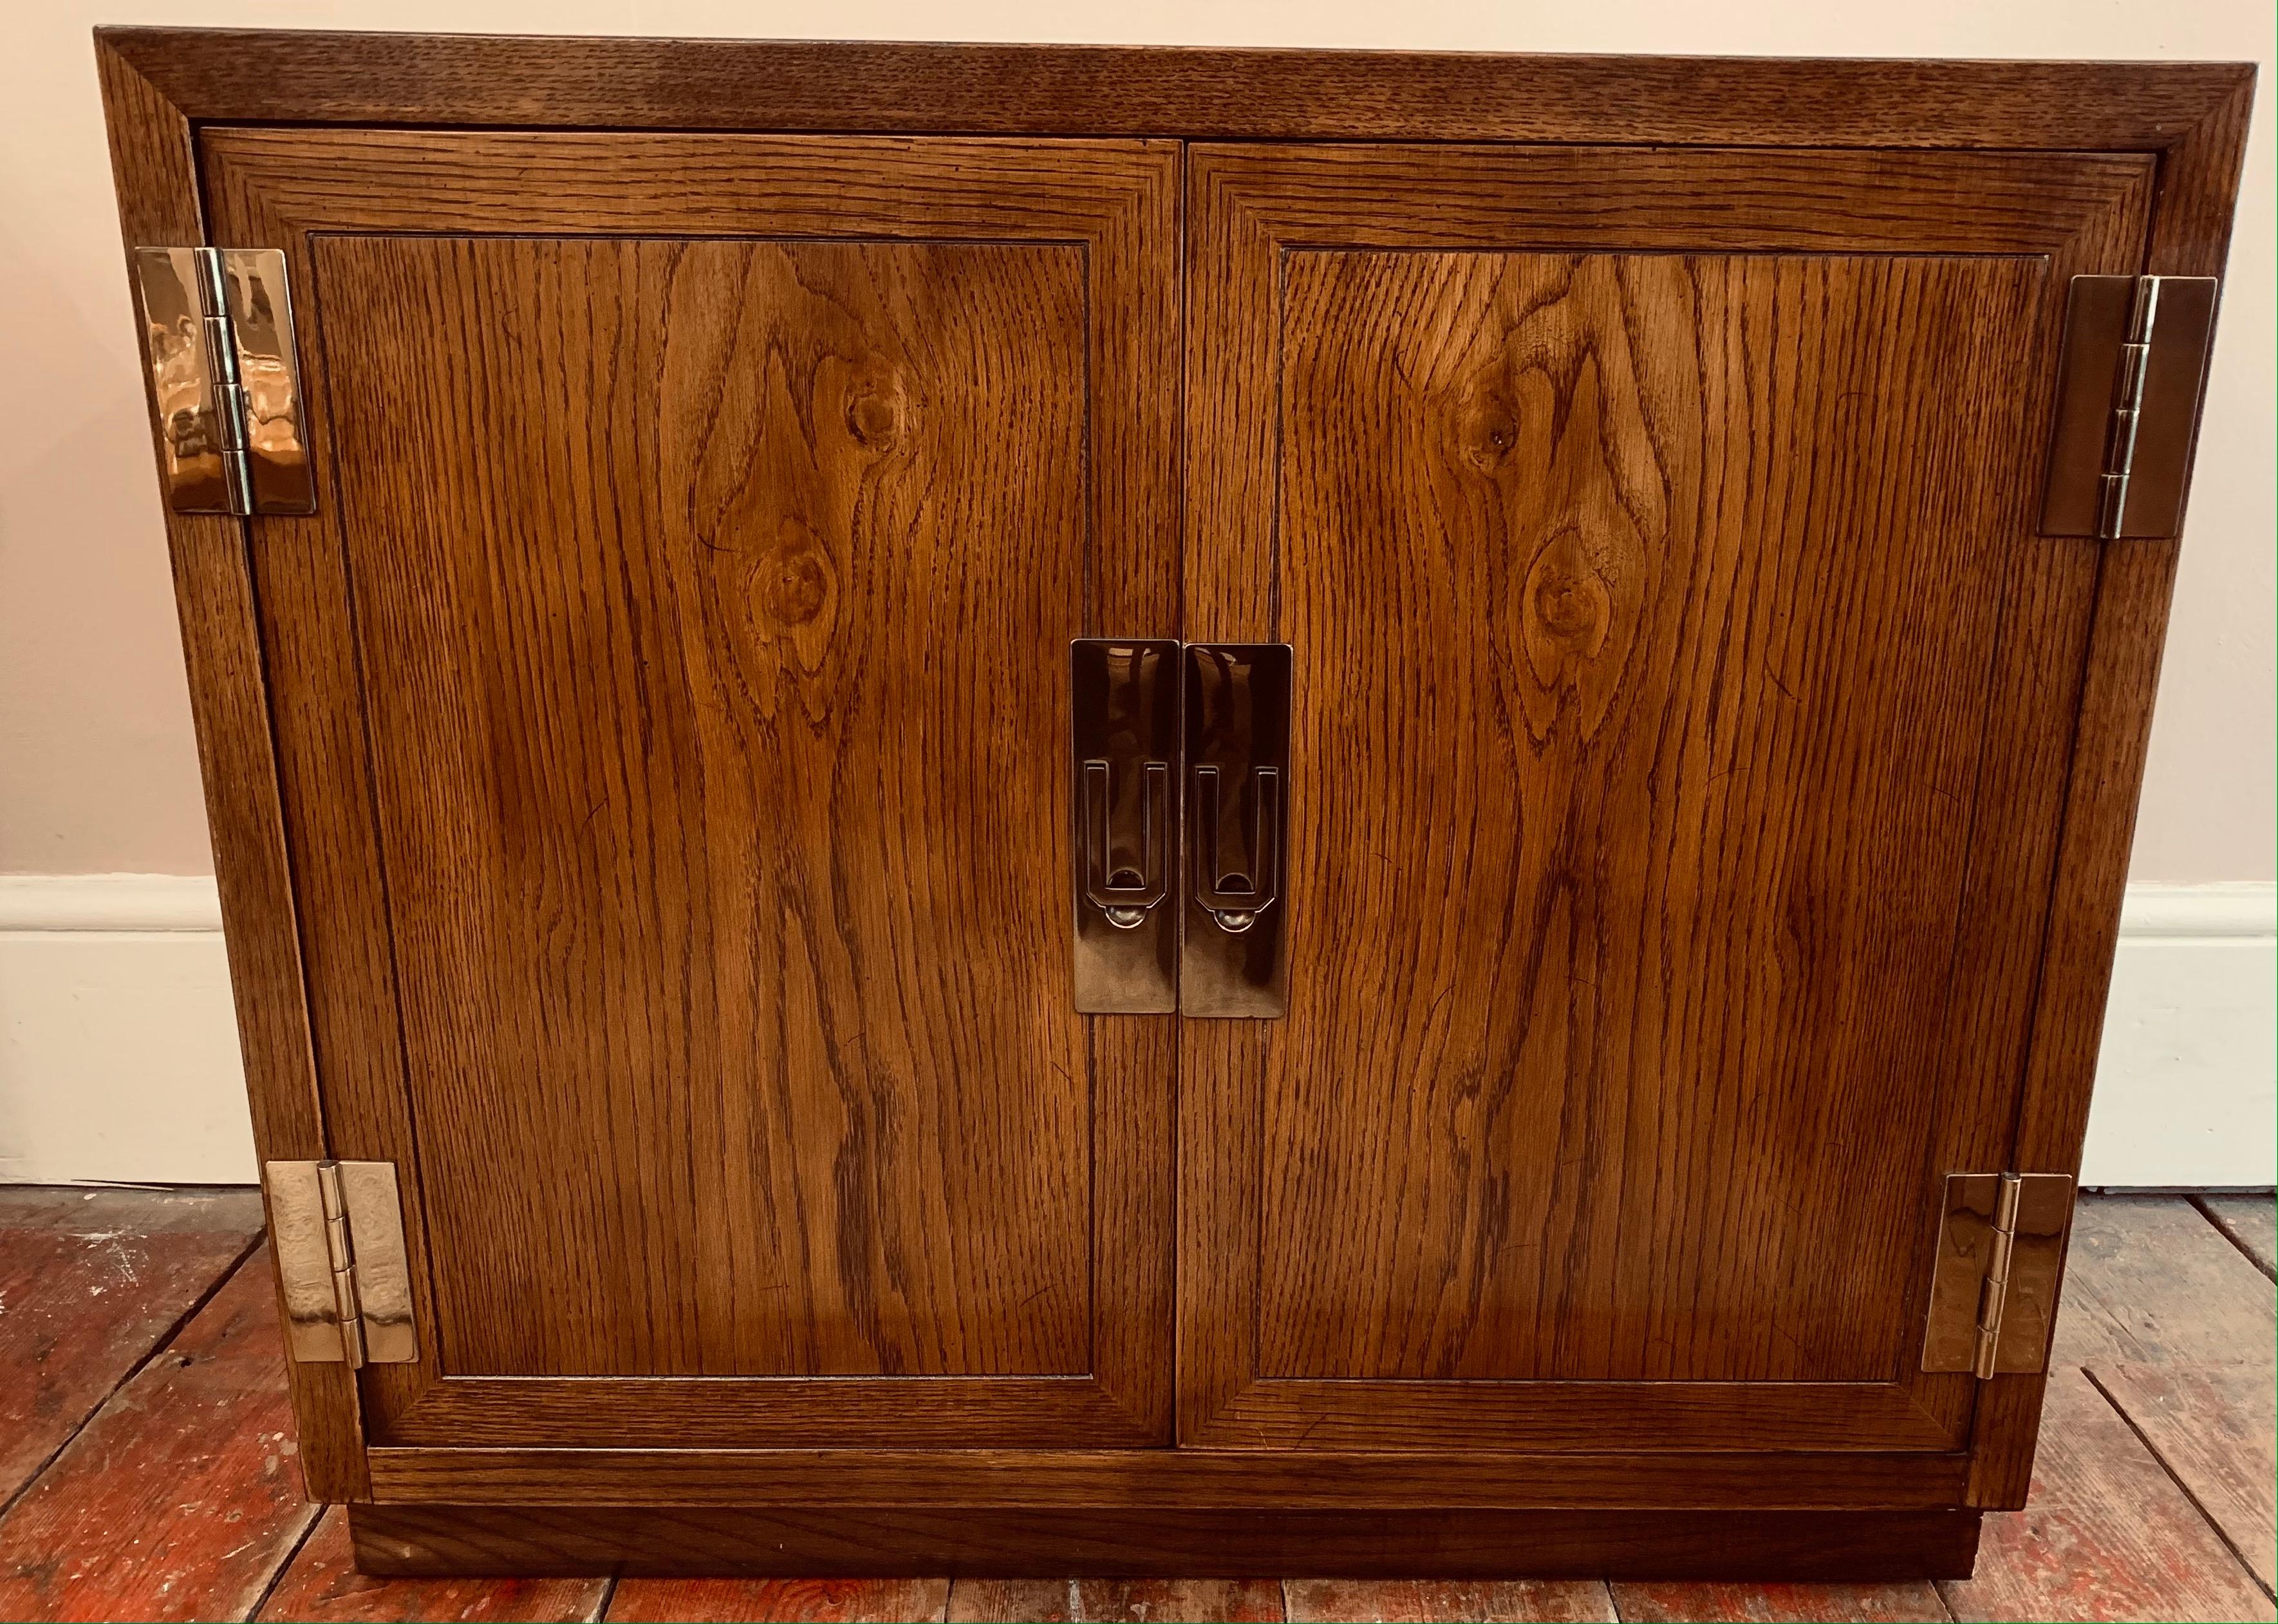 A vintage, 1970s, Henredon USA, Campaign two door cabinet. Hollywood Regency style. Made from stained Oak, with its original polished brass hardware pull handles and hinges. The chest is well made, solid and very heavy considering its size. The